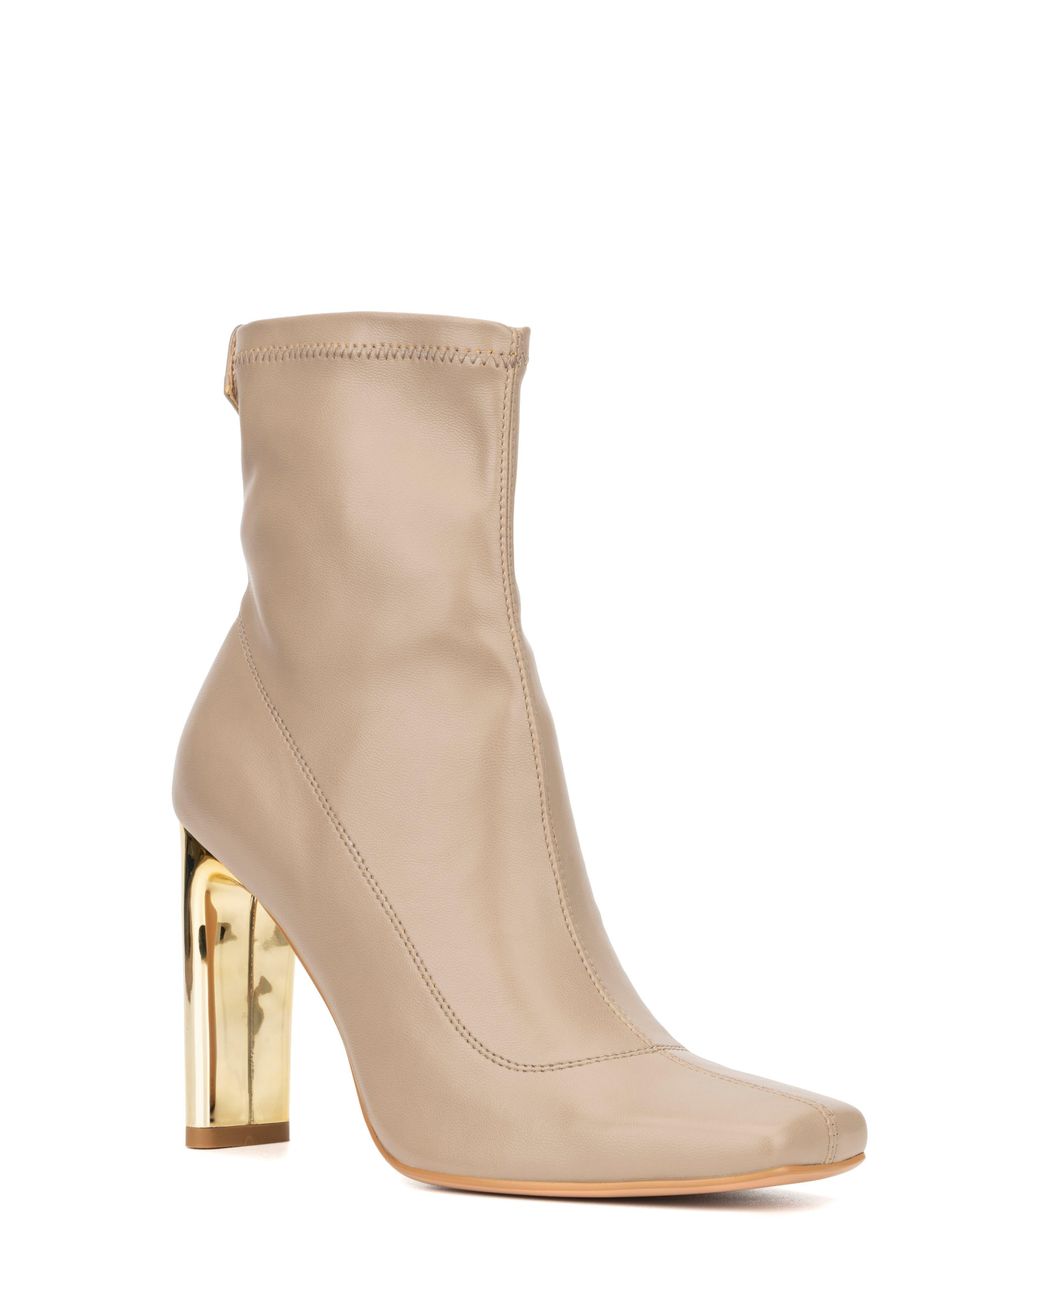 TORGEIS Chiara Square Toe Bootie in Natural | Lyst